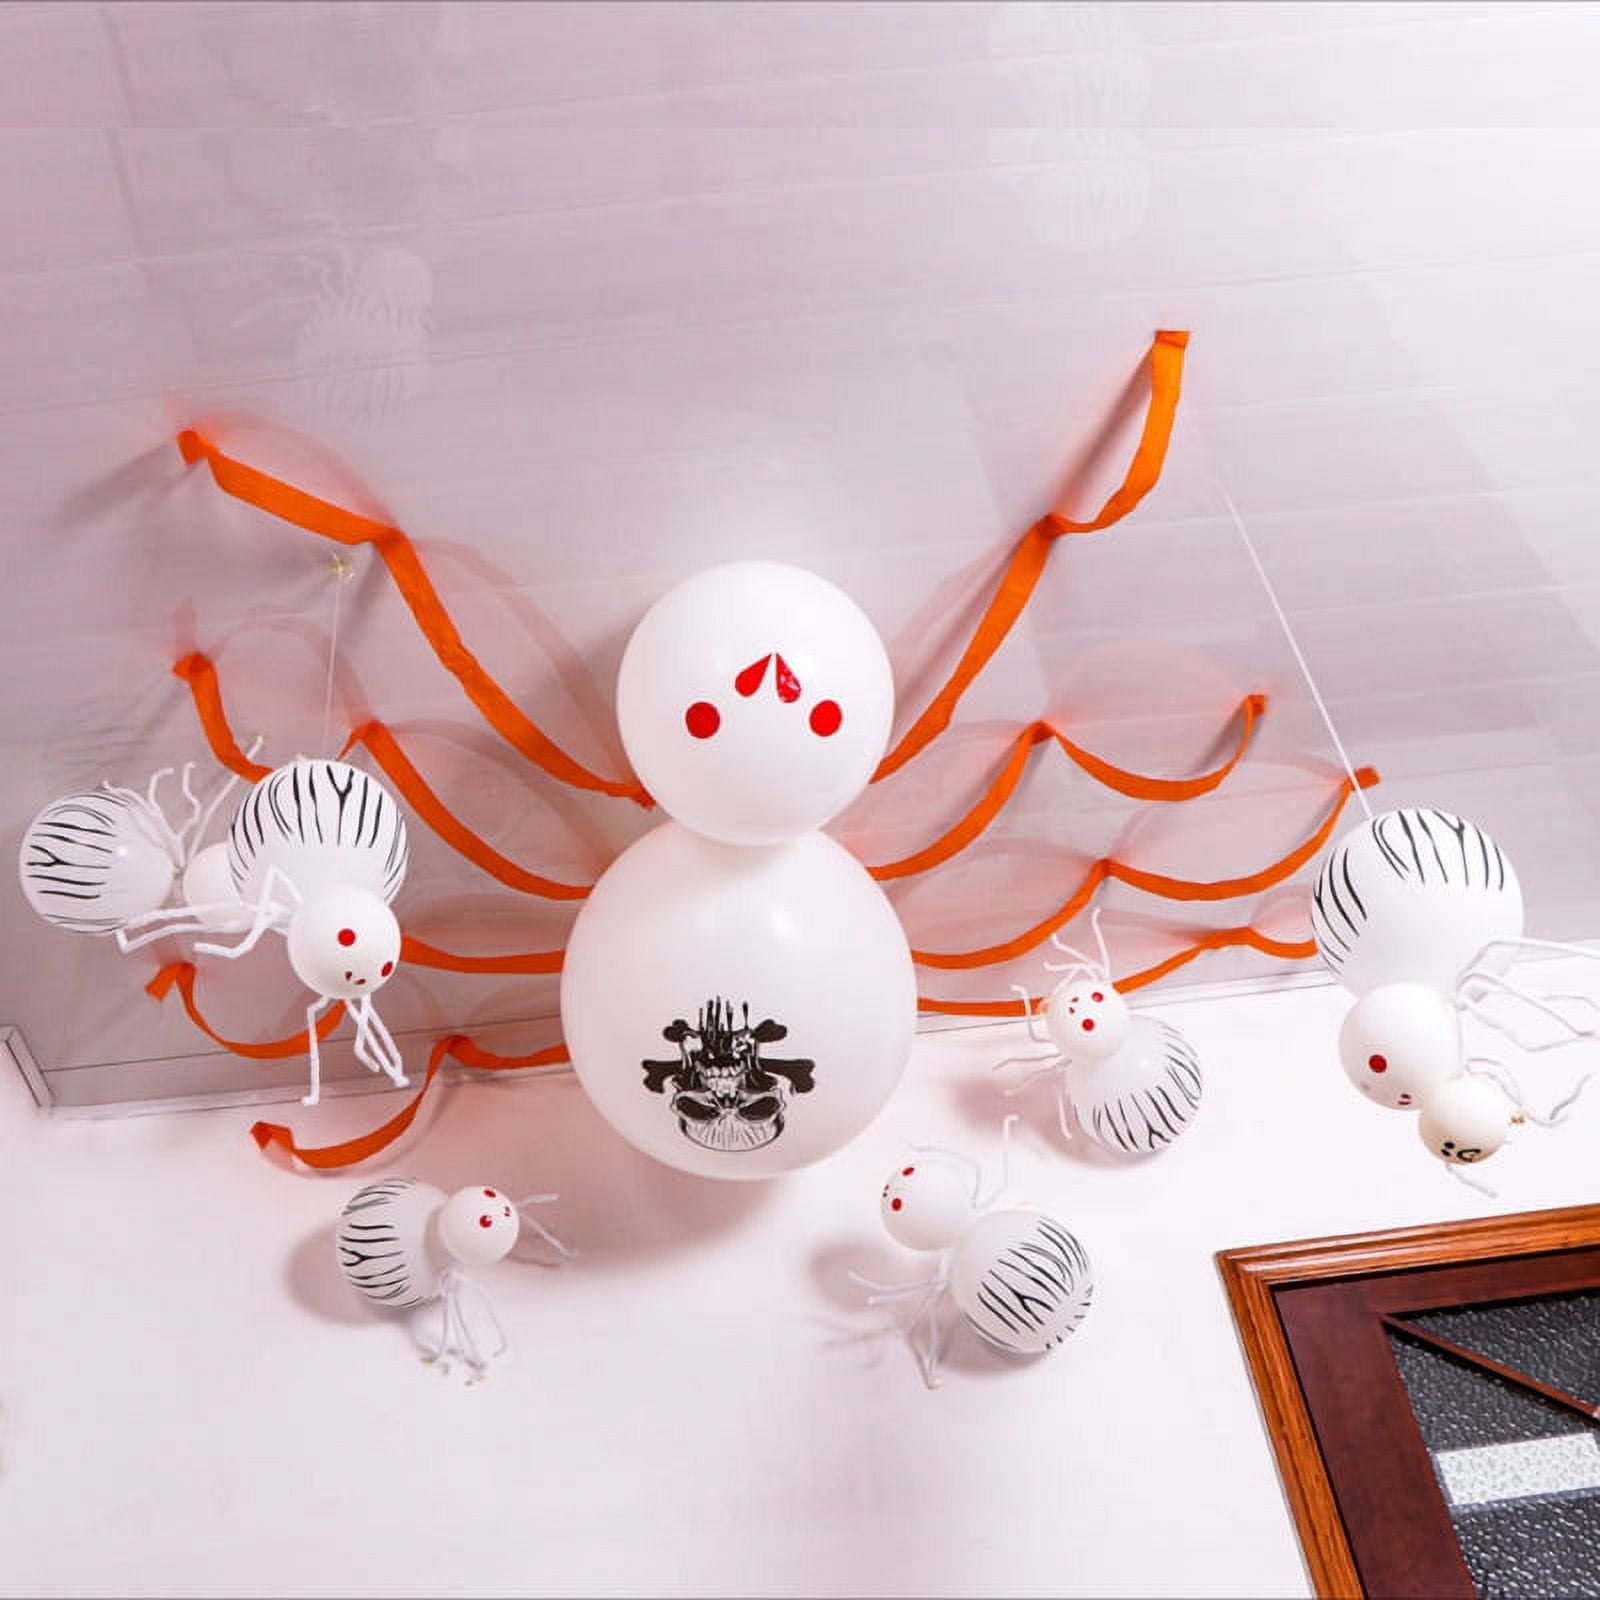 7 Packs Halloween Decorations Hanging Spider with Balloon ...